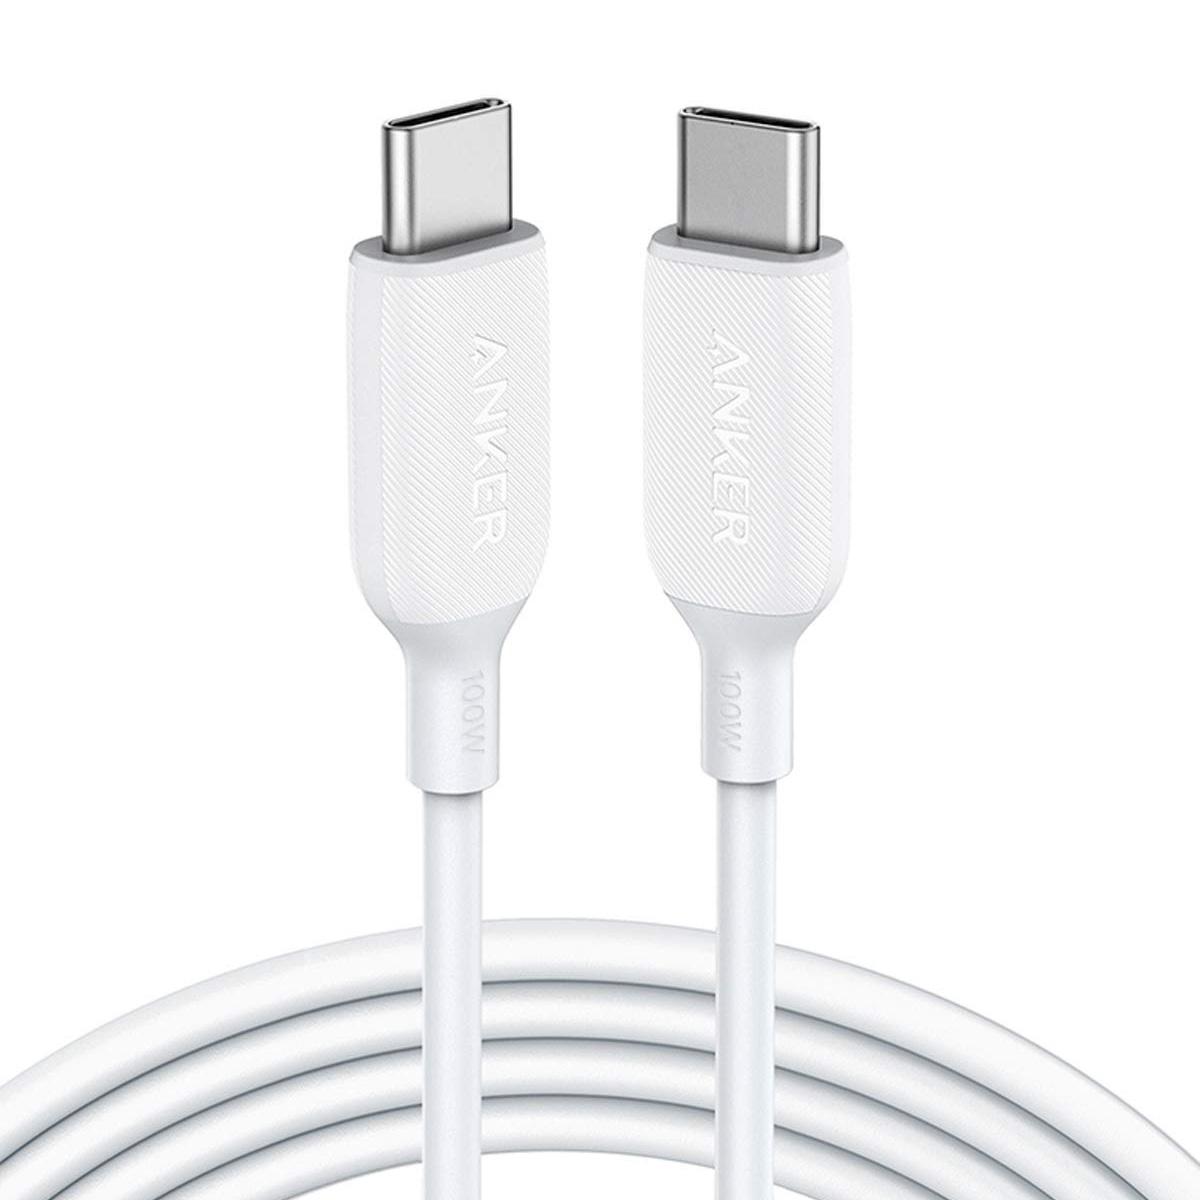 Anker Powerline III USB C to USB C Charger Cable for $11.99